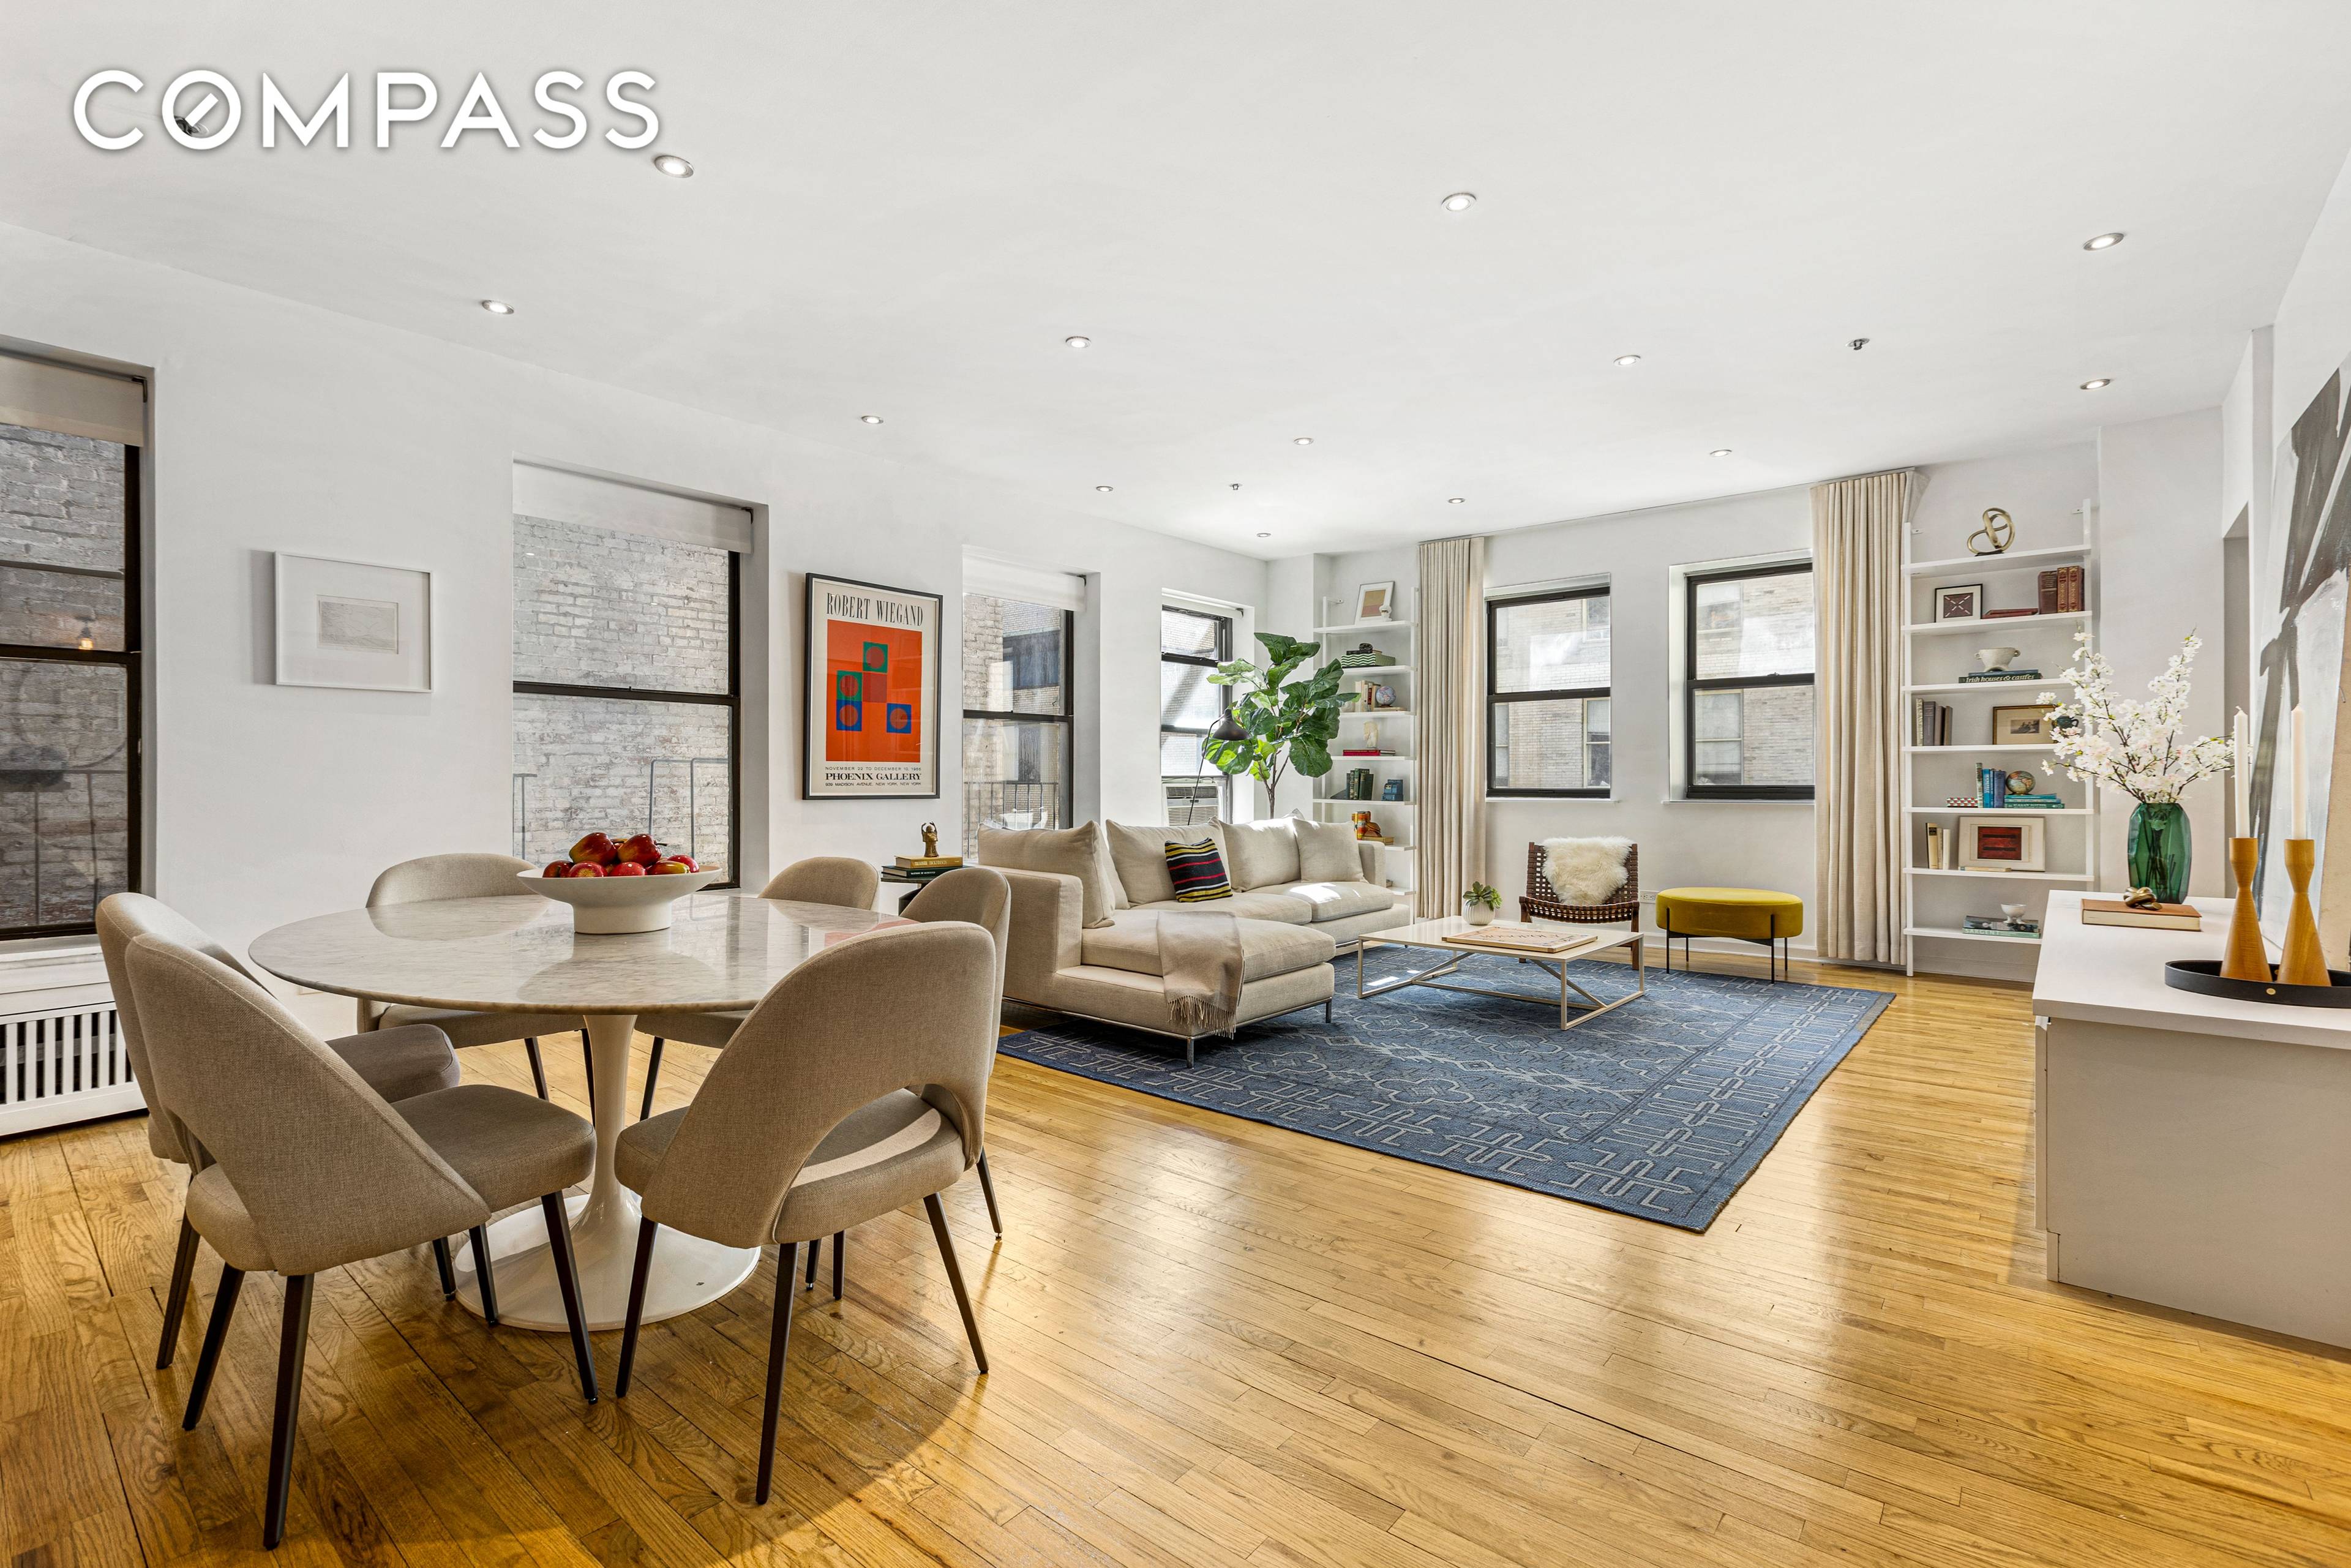 THE PERFECT 3BR 2BATH LOFT IN THE CENTER OF BROOKLYN HEIGHTS A rarely available J line apartment of loft like living spaces with three large bedrooms, two full baths, in ...